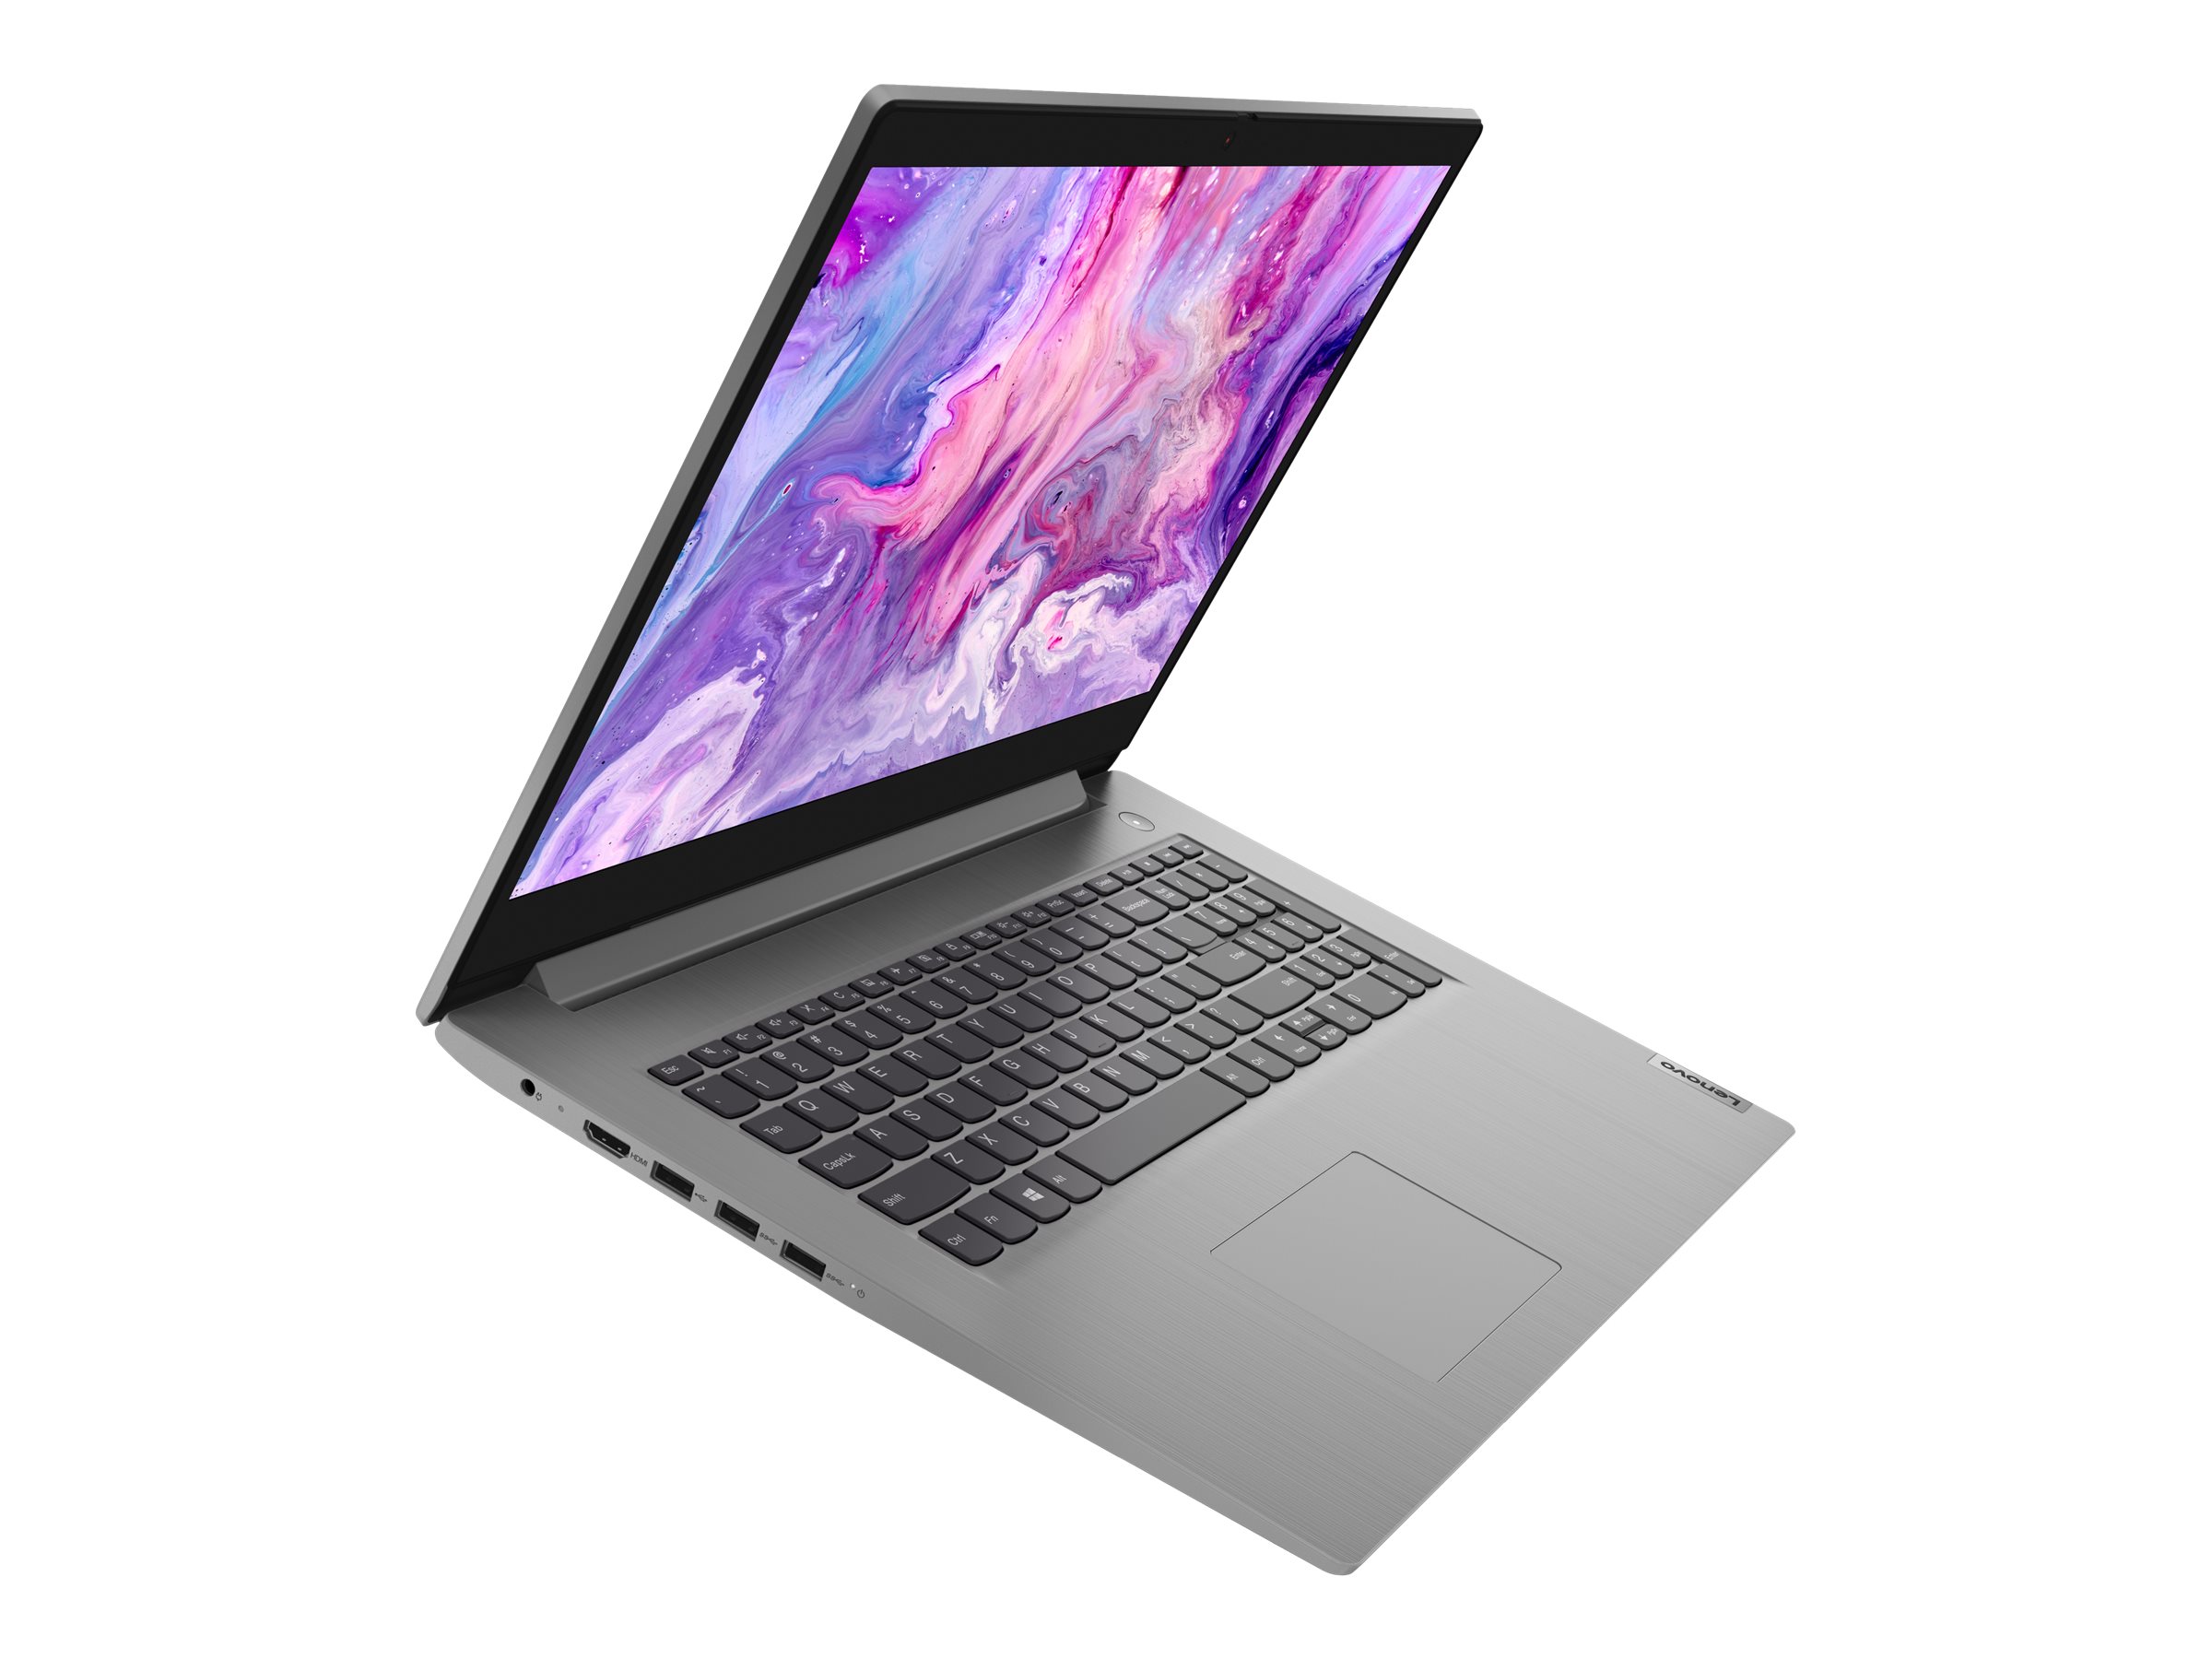 Lenovo IdeaPad 3 17ADA05 (81W2) - pictures, photos and images